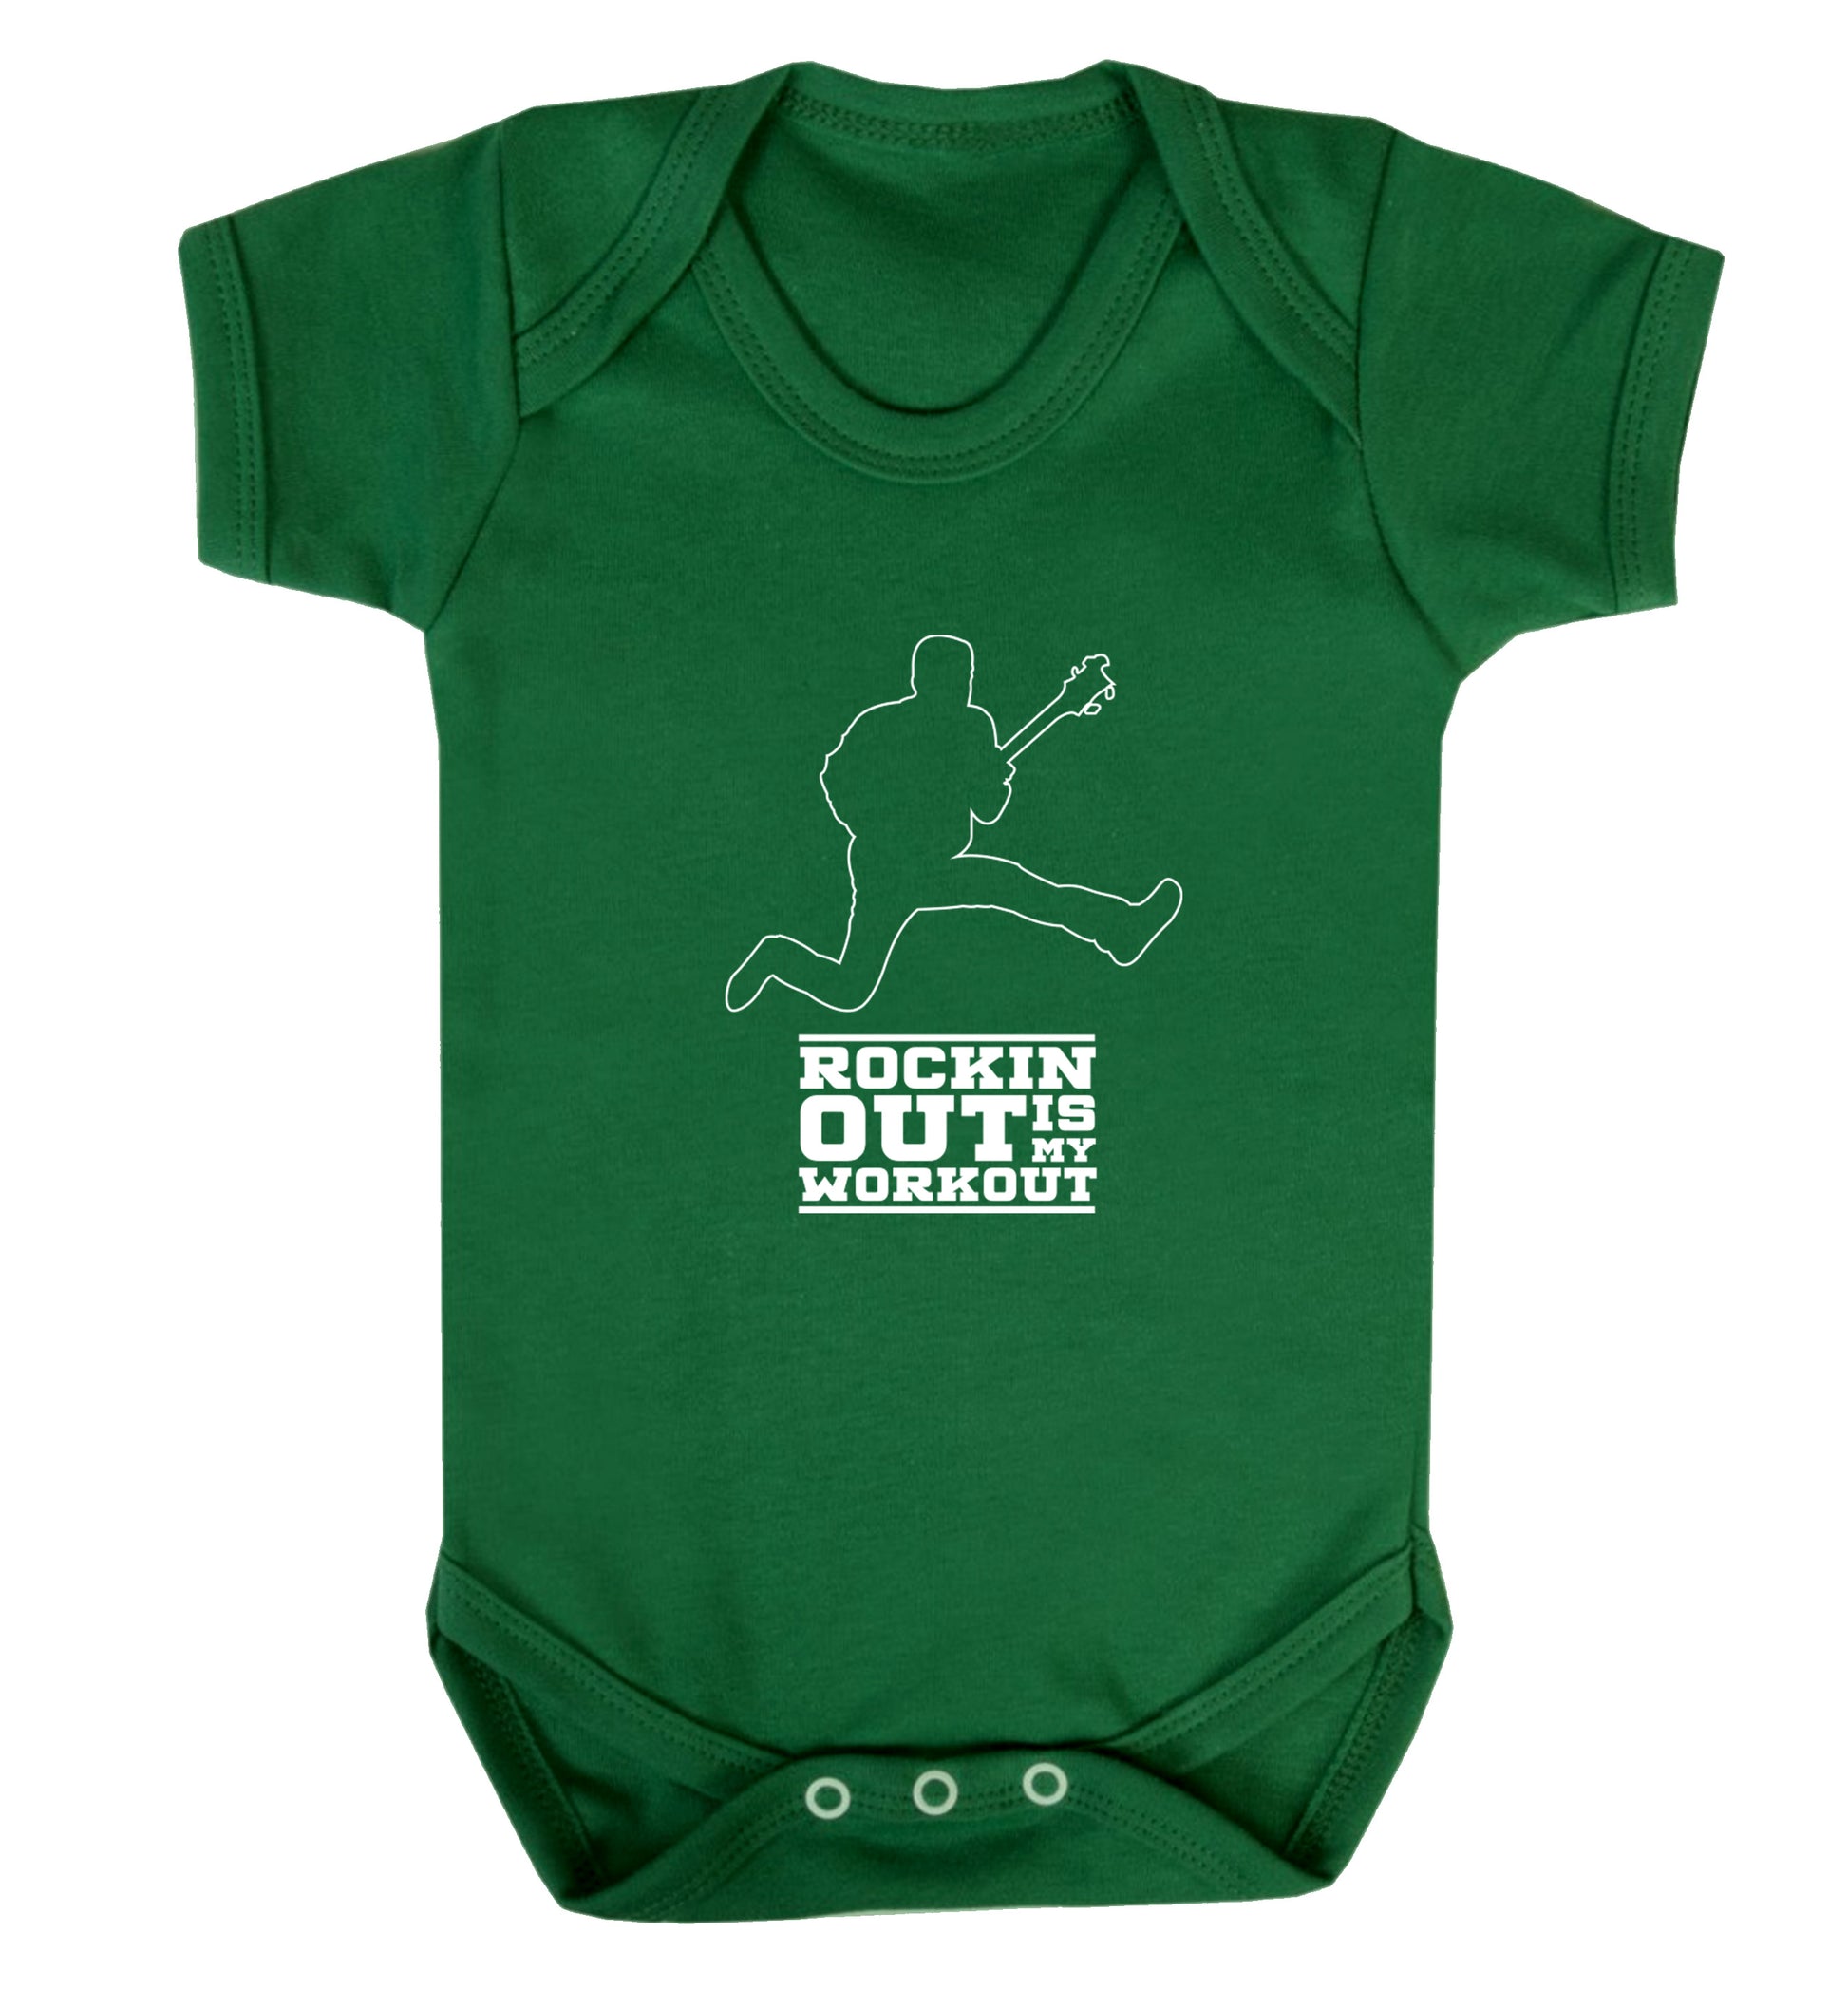 Rockin out is my workout 2 Baby Vest green 18-24 months